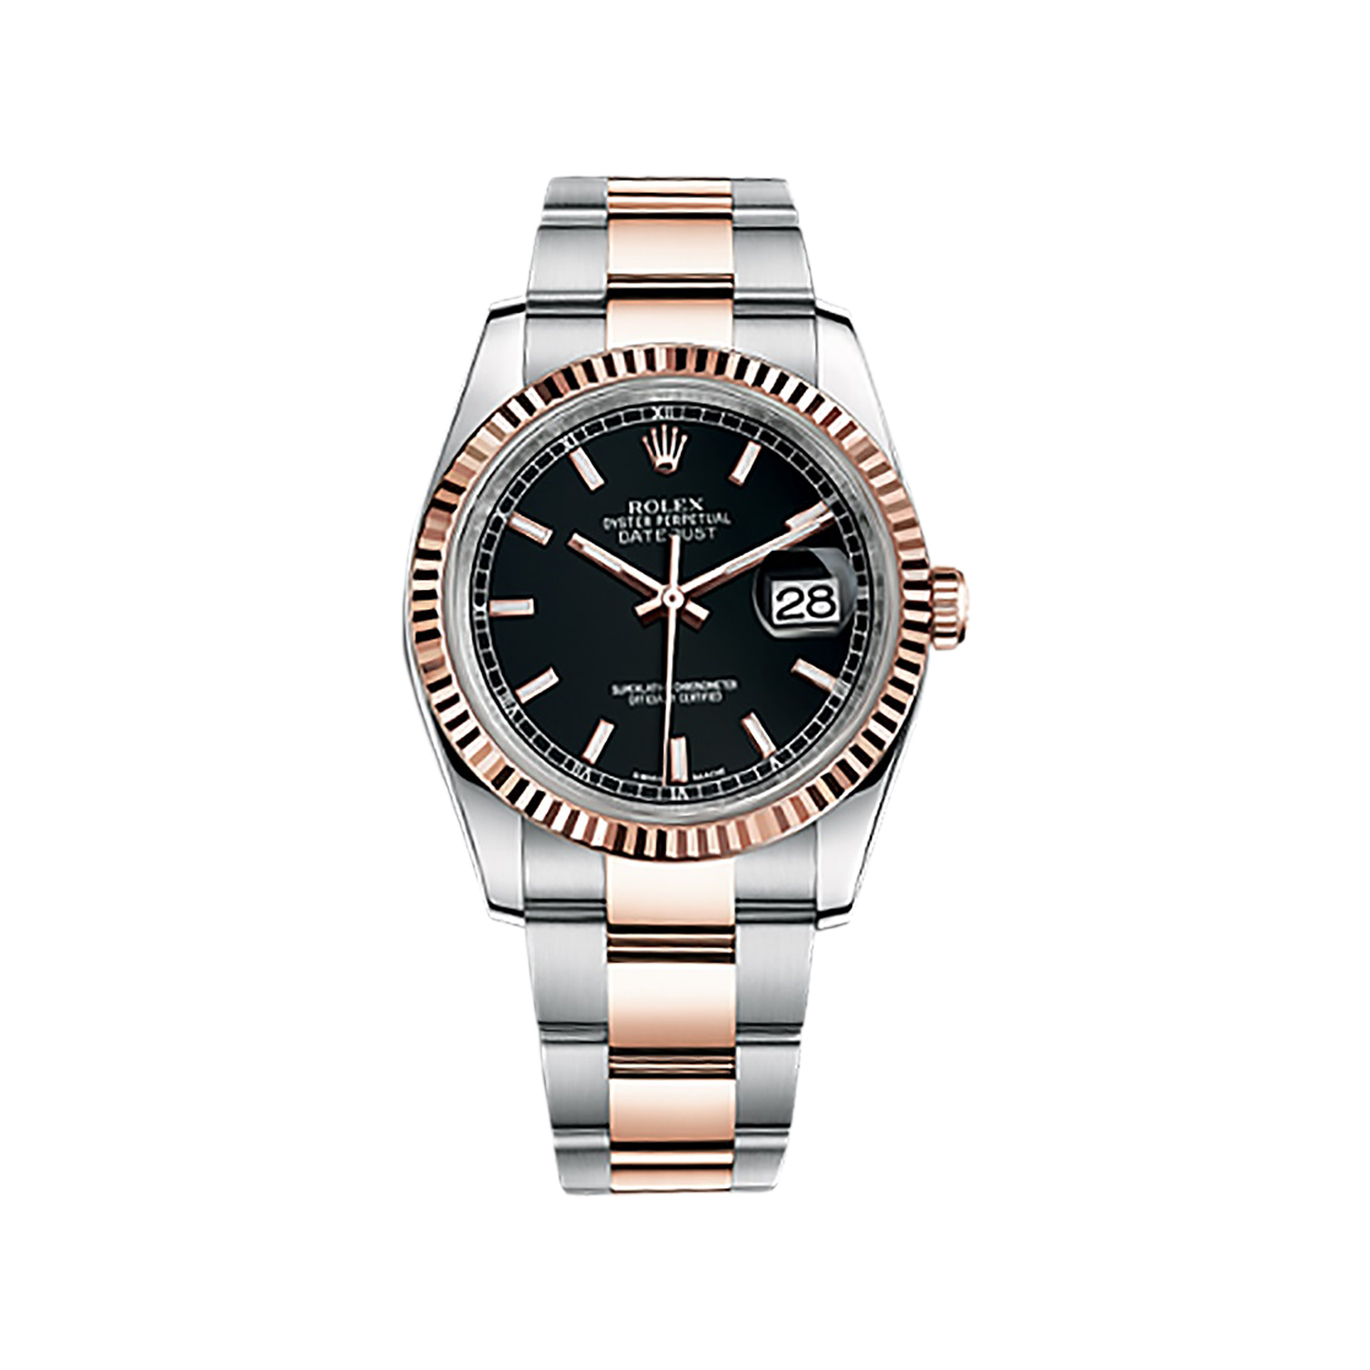 Datejust 36 116231 Rose Gold & Stainless Steel Watch (Black)